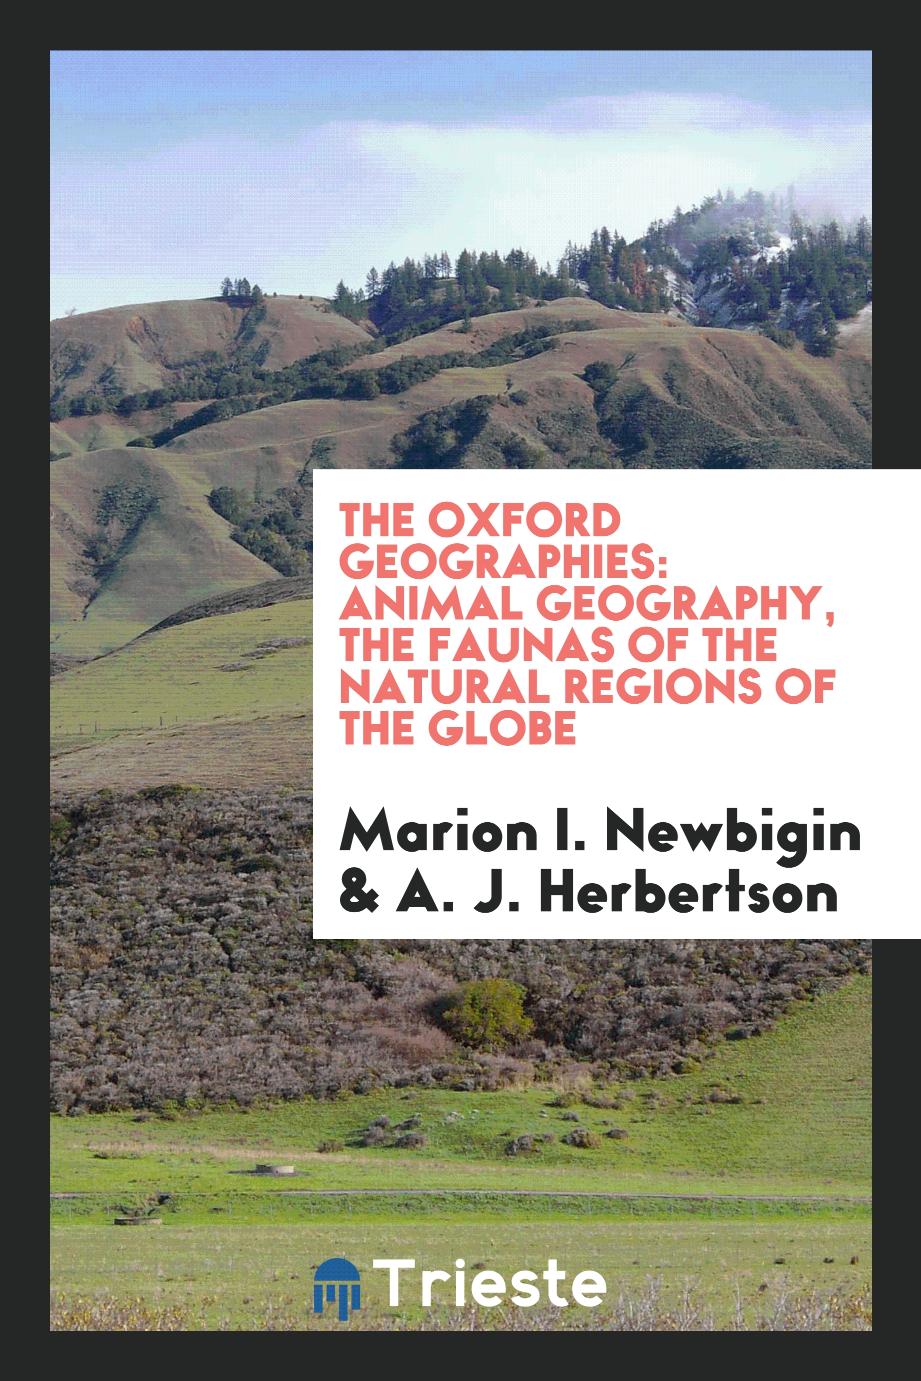 The oxford geographies: Animal geography, the faunas of the natural regions of the Globe